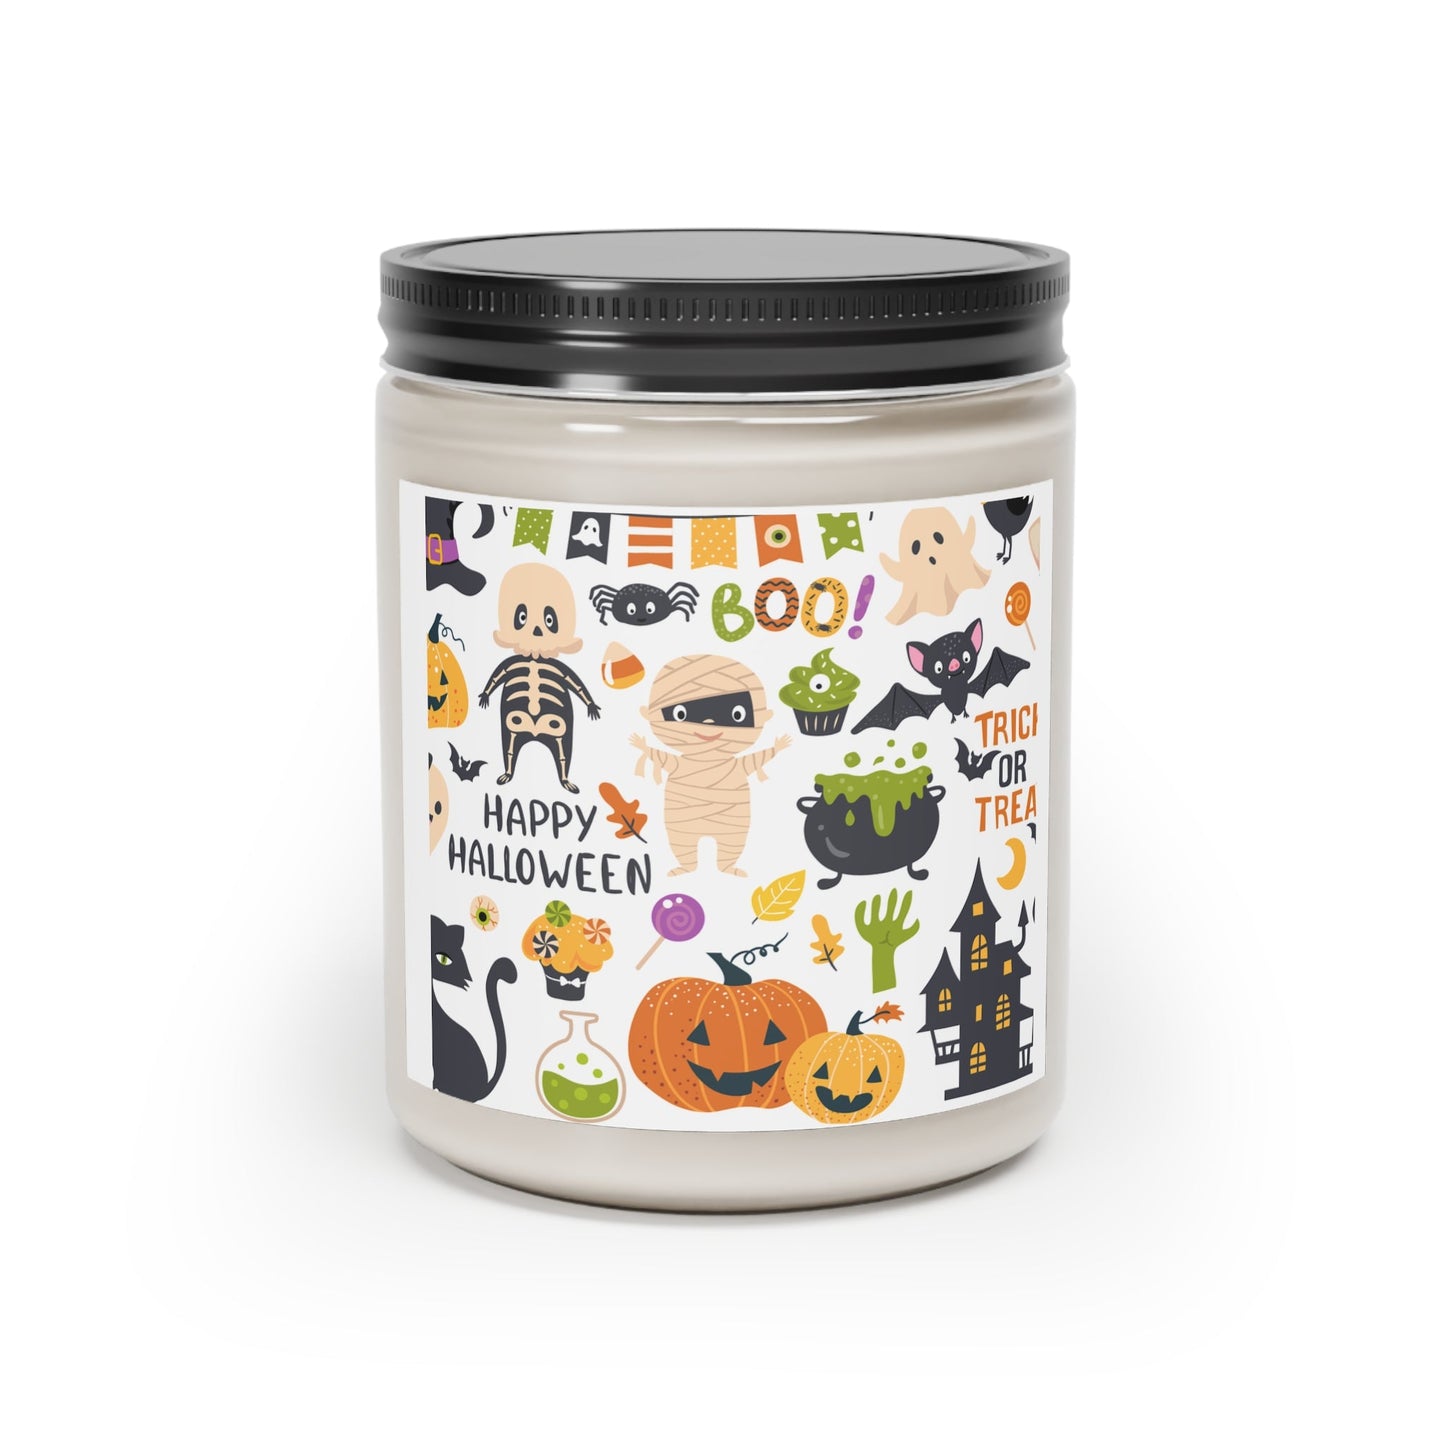 Home Decor - Halloween Scented Candle, 9oz